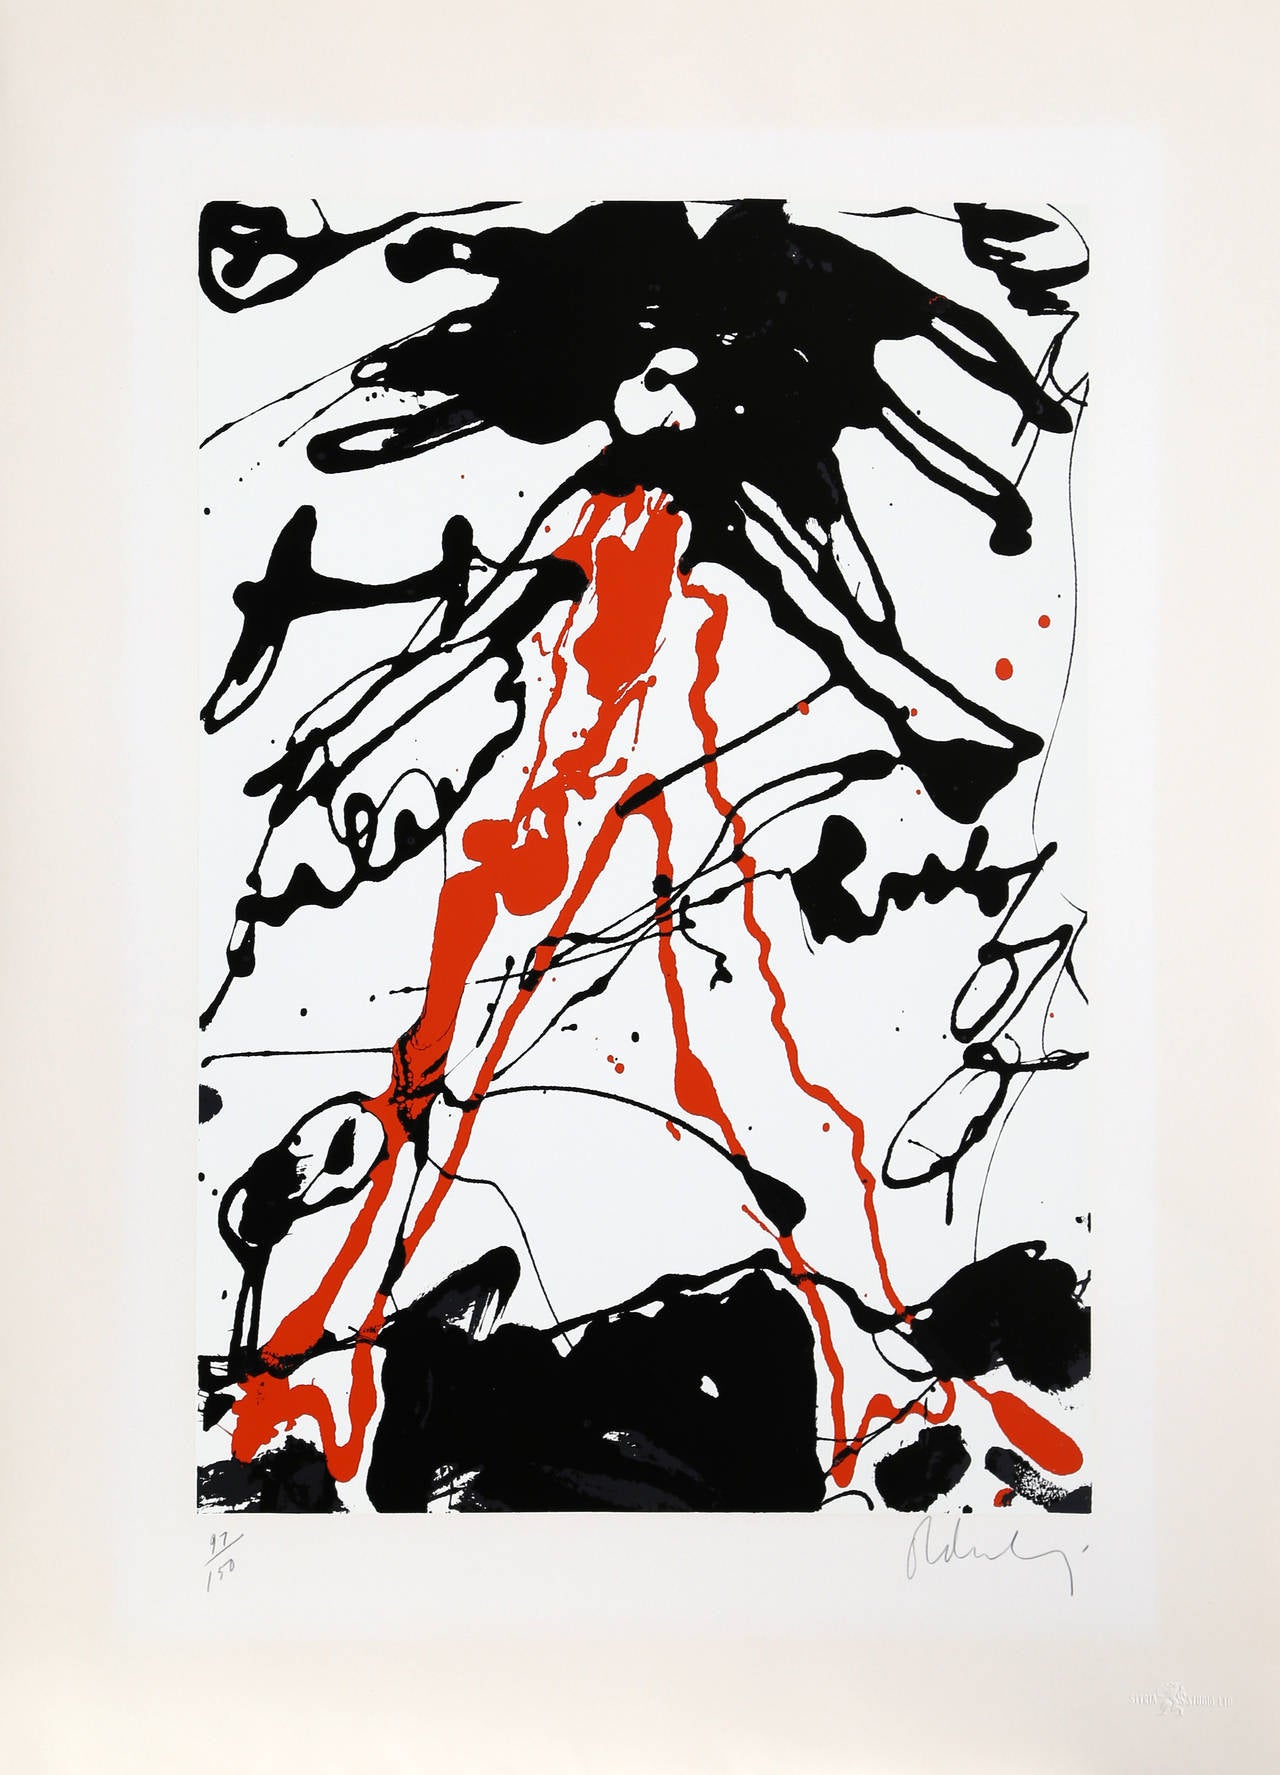 Striding Figure from Conspiracy: The Artist as Witness Portfolio